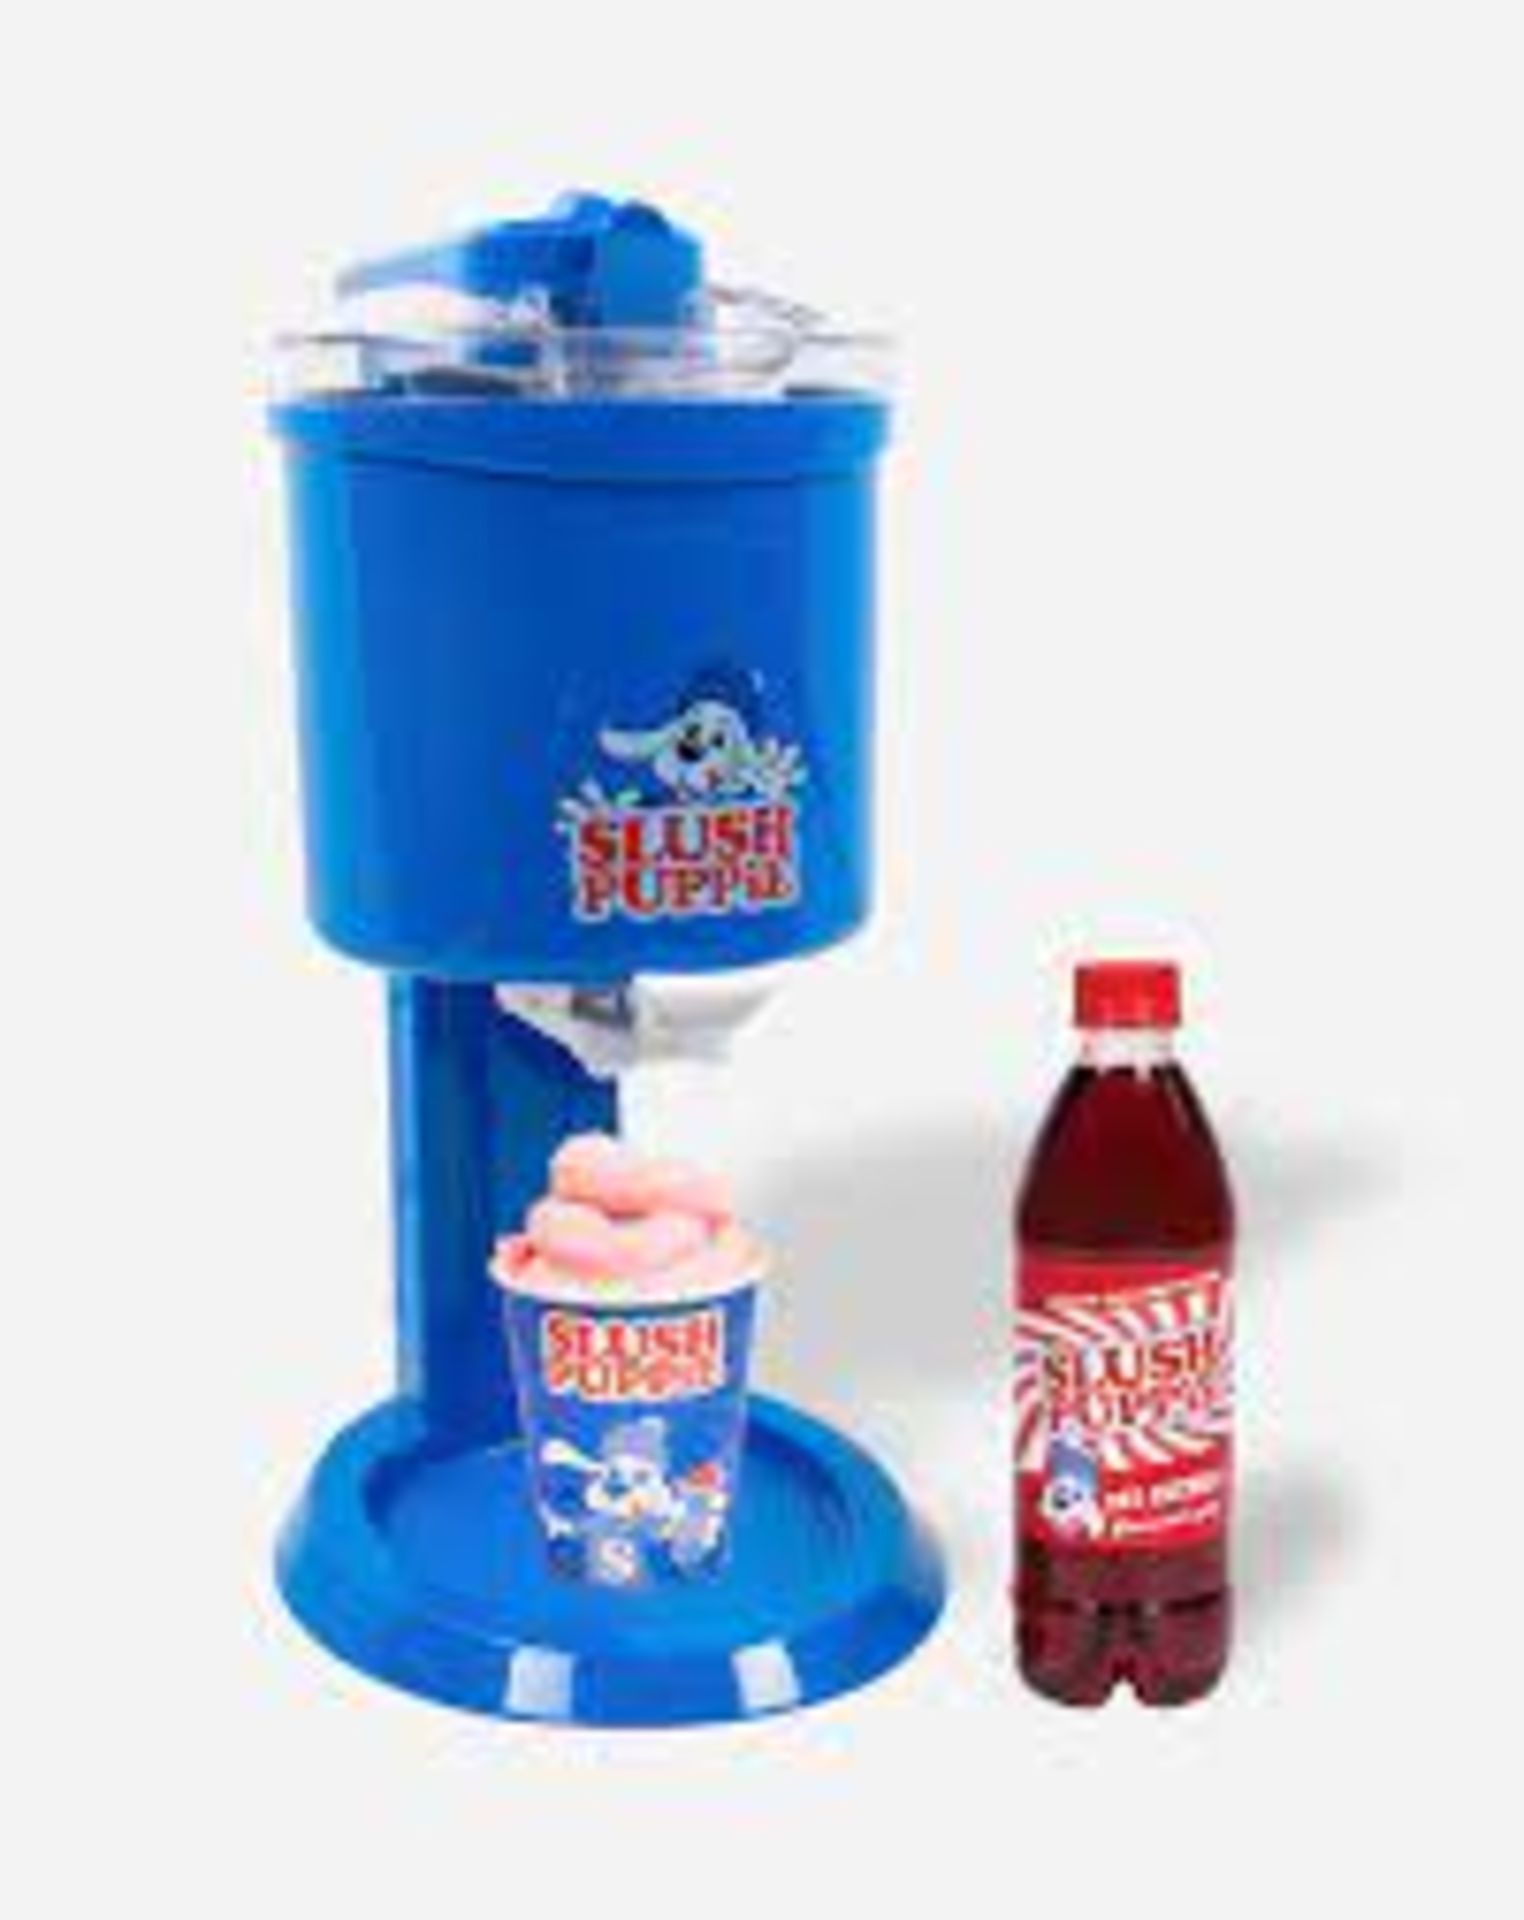 2 X NEW BOXED SLUSH PUPPIE ICE CREAM PARTY PACK. ICE CREAM MAKER AND RED CHERRIE SYRUP. (ROW15RACK) - Image 2 of 2